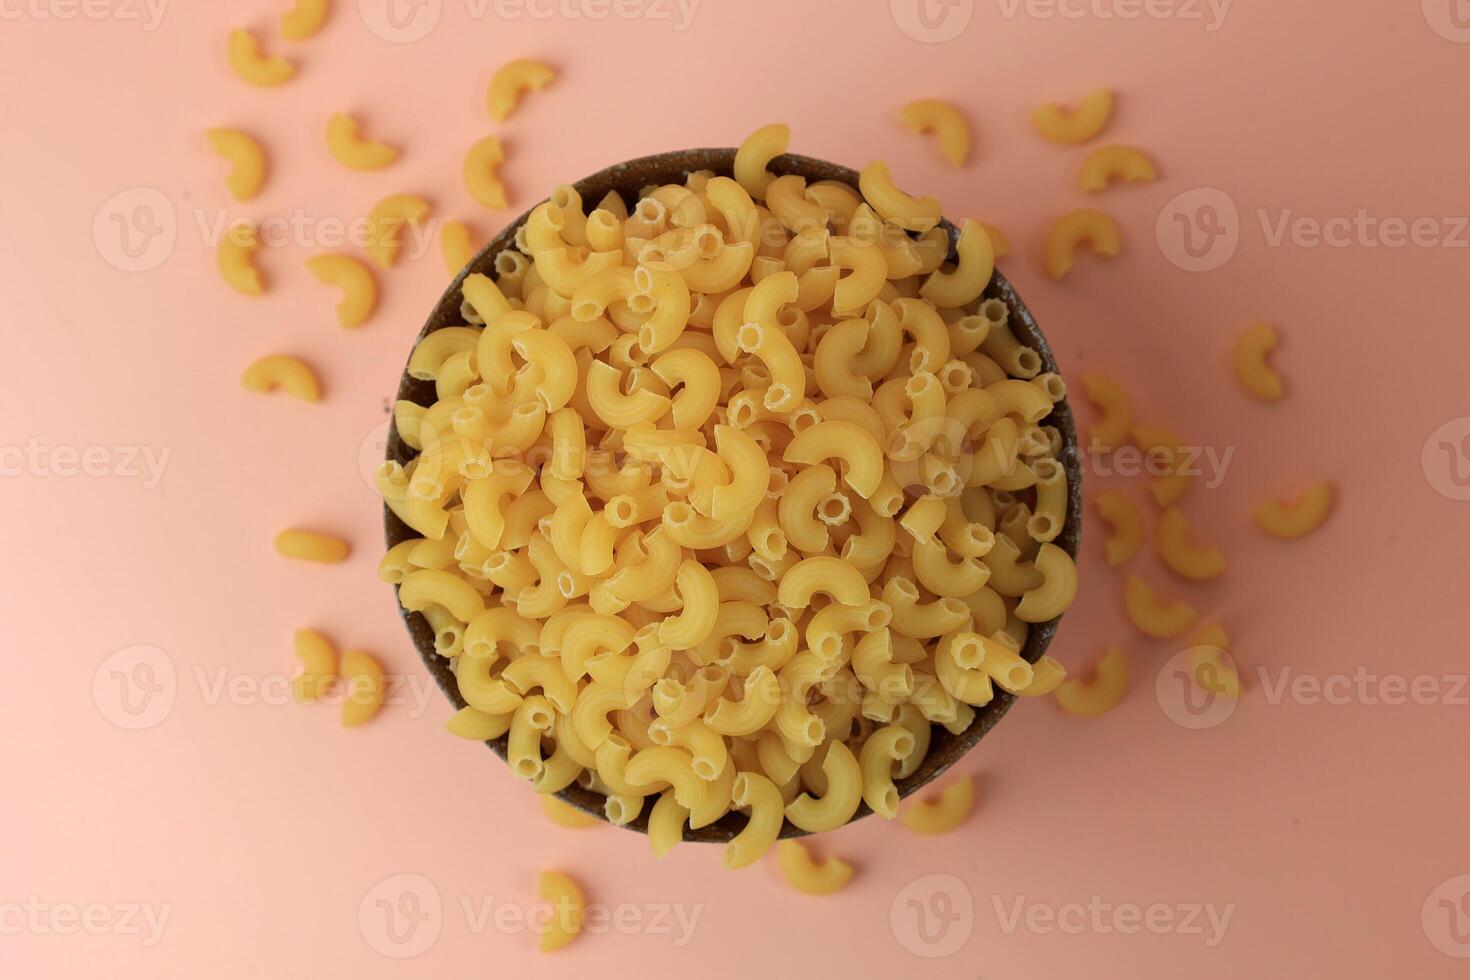 Raw Dried Elbow Macaroni for Cooking Pasta photo